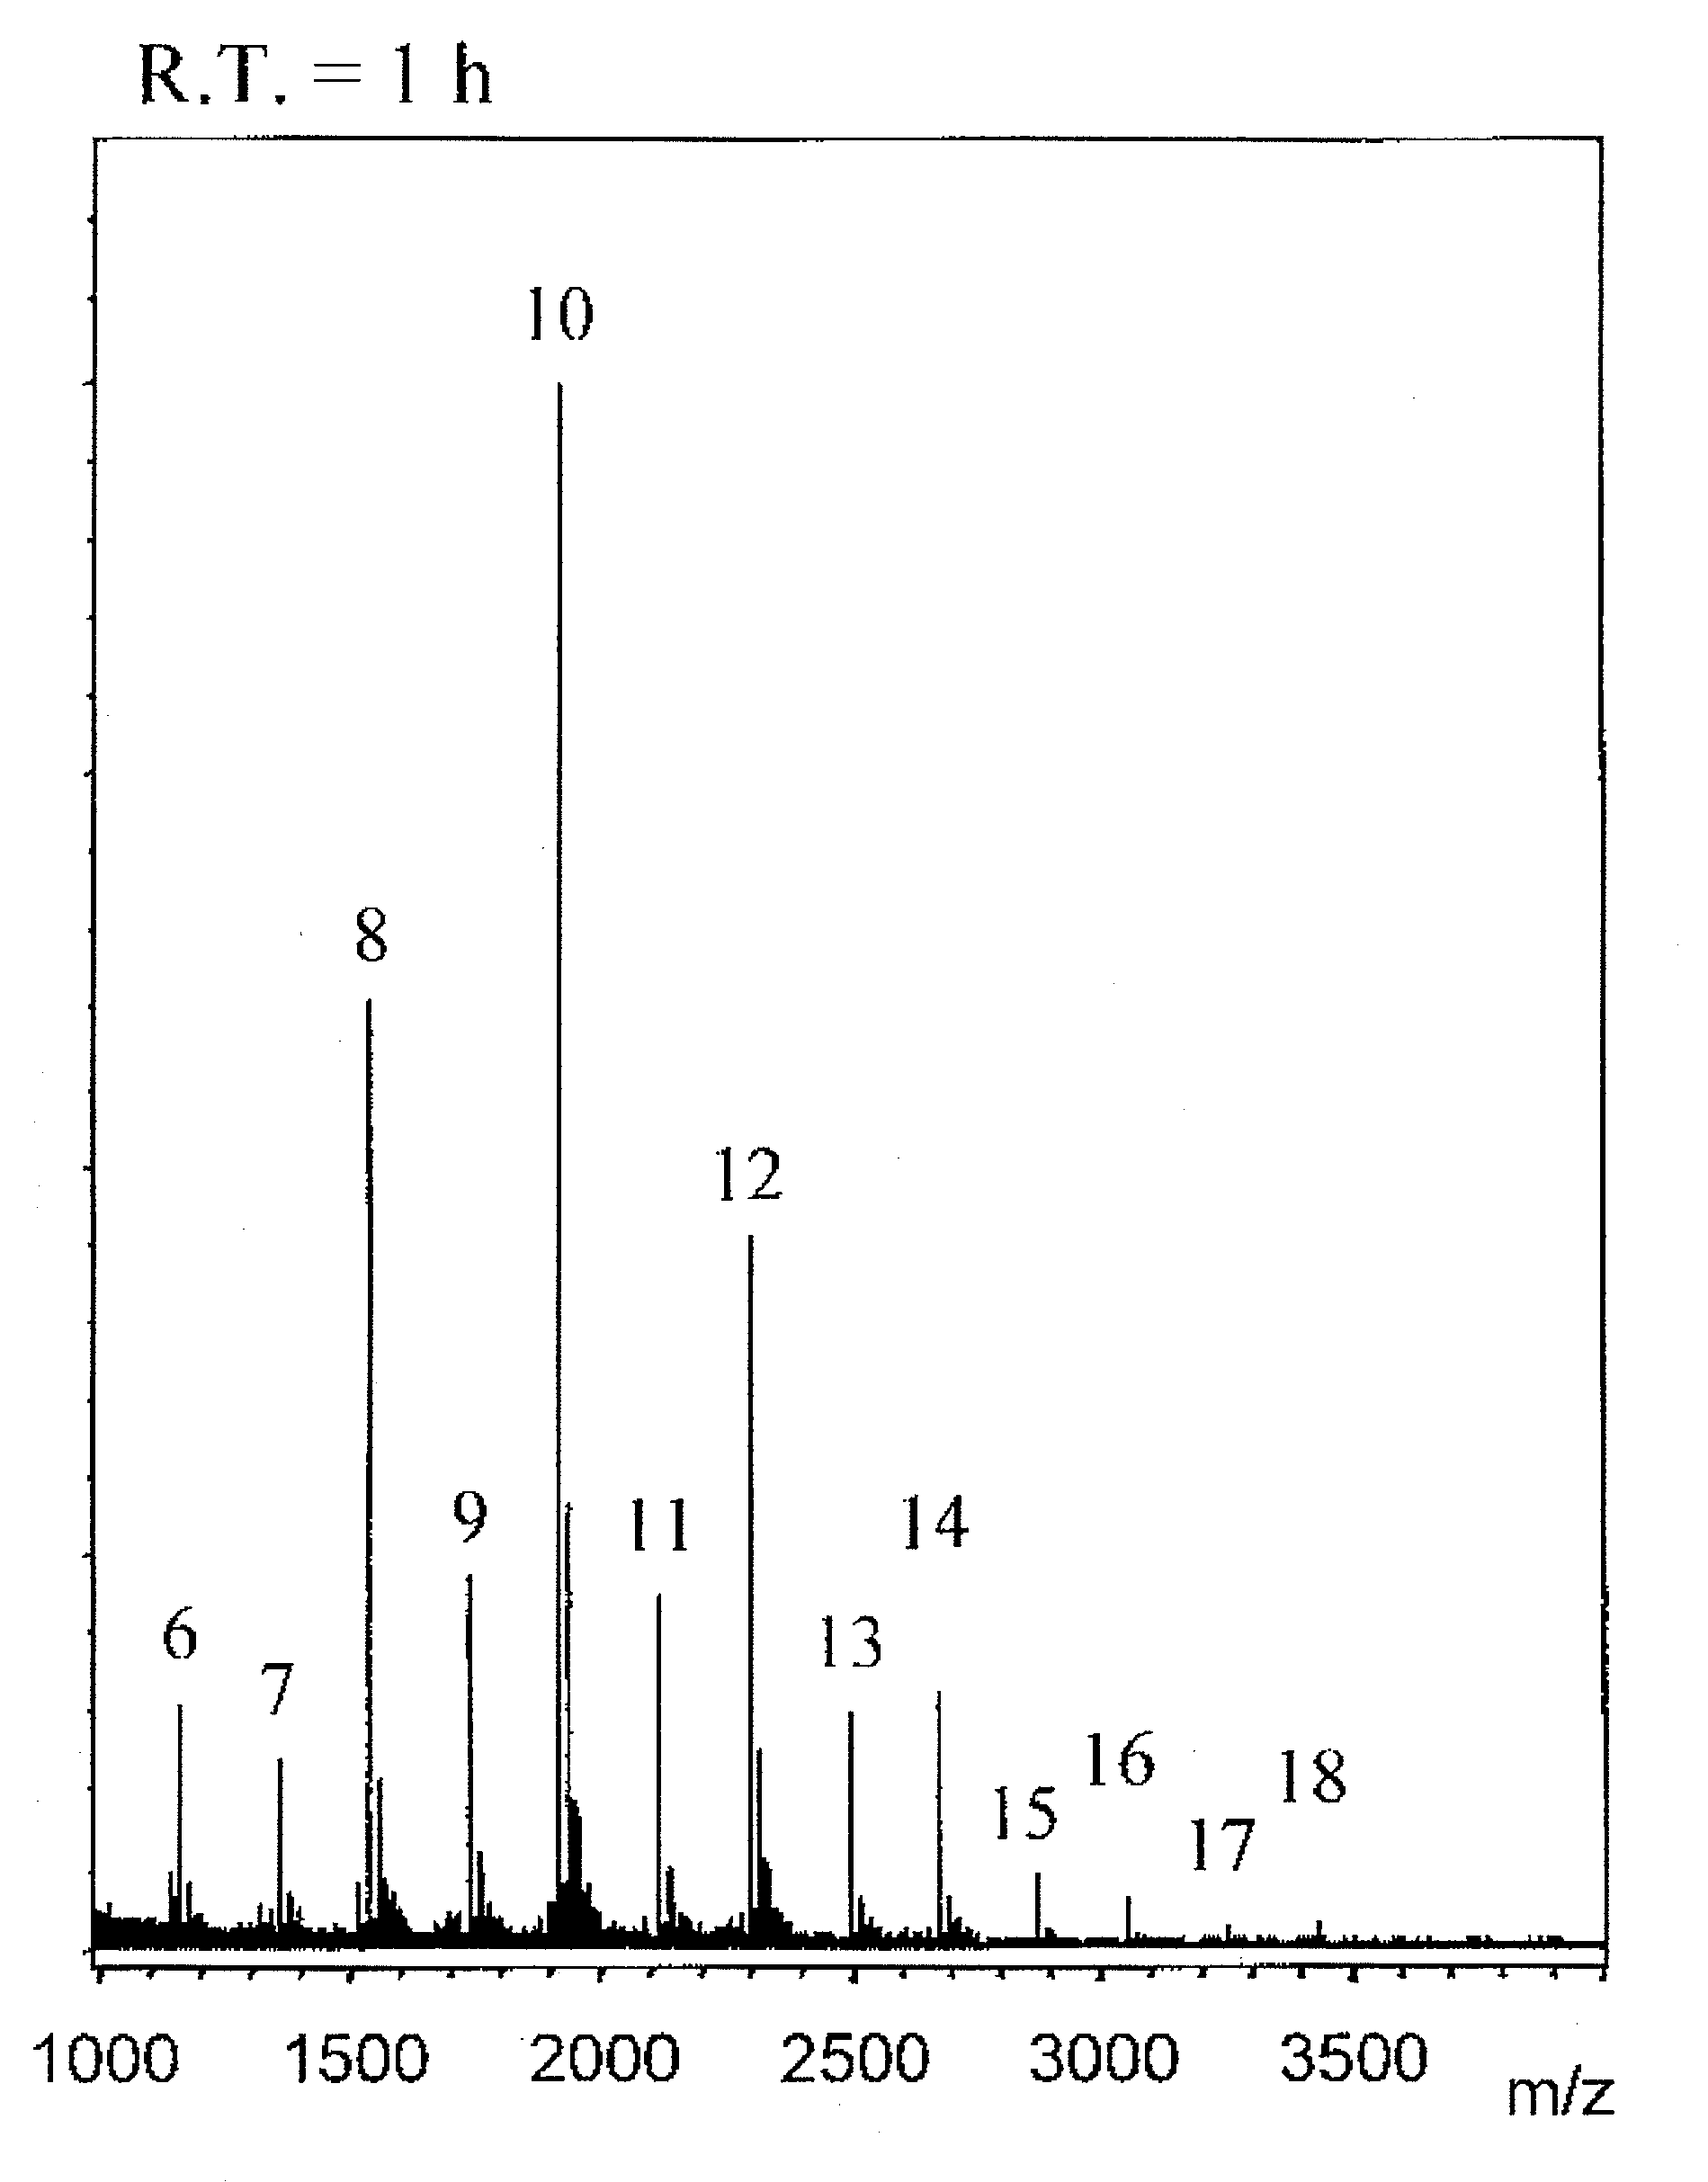 Novel process for preparation of chondroitin fraction